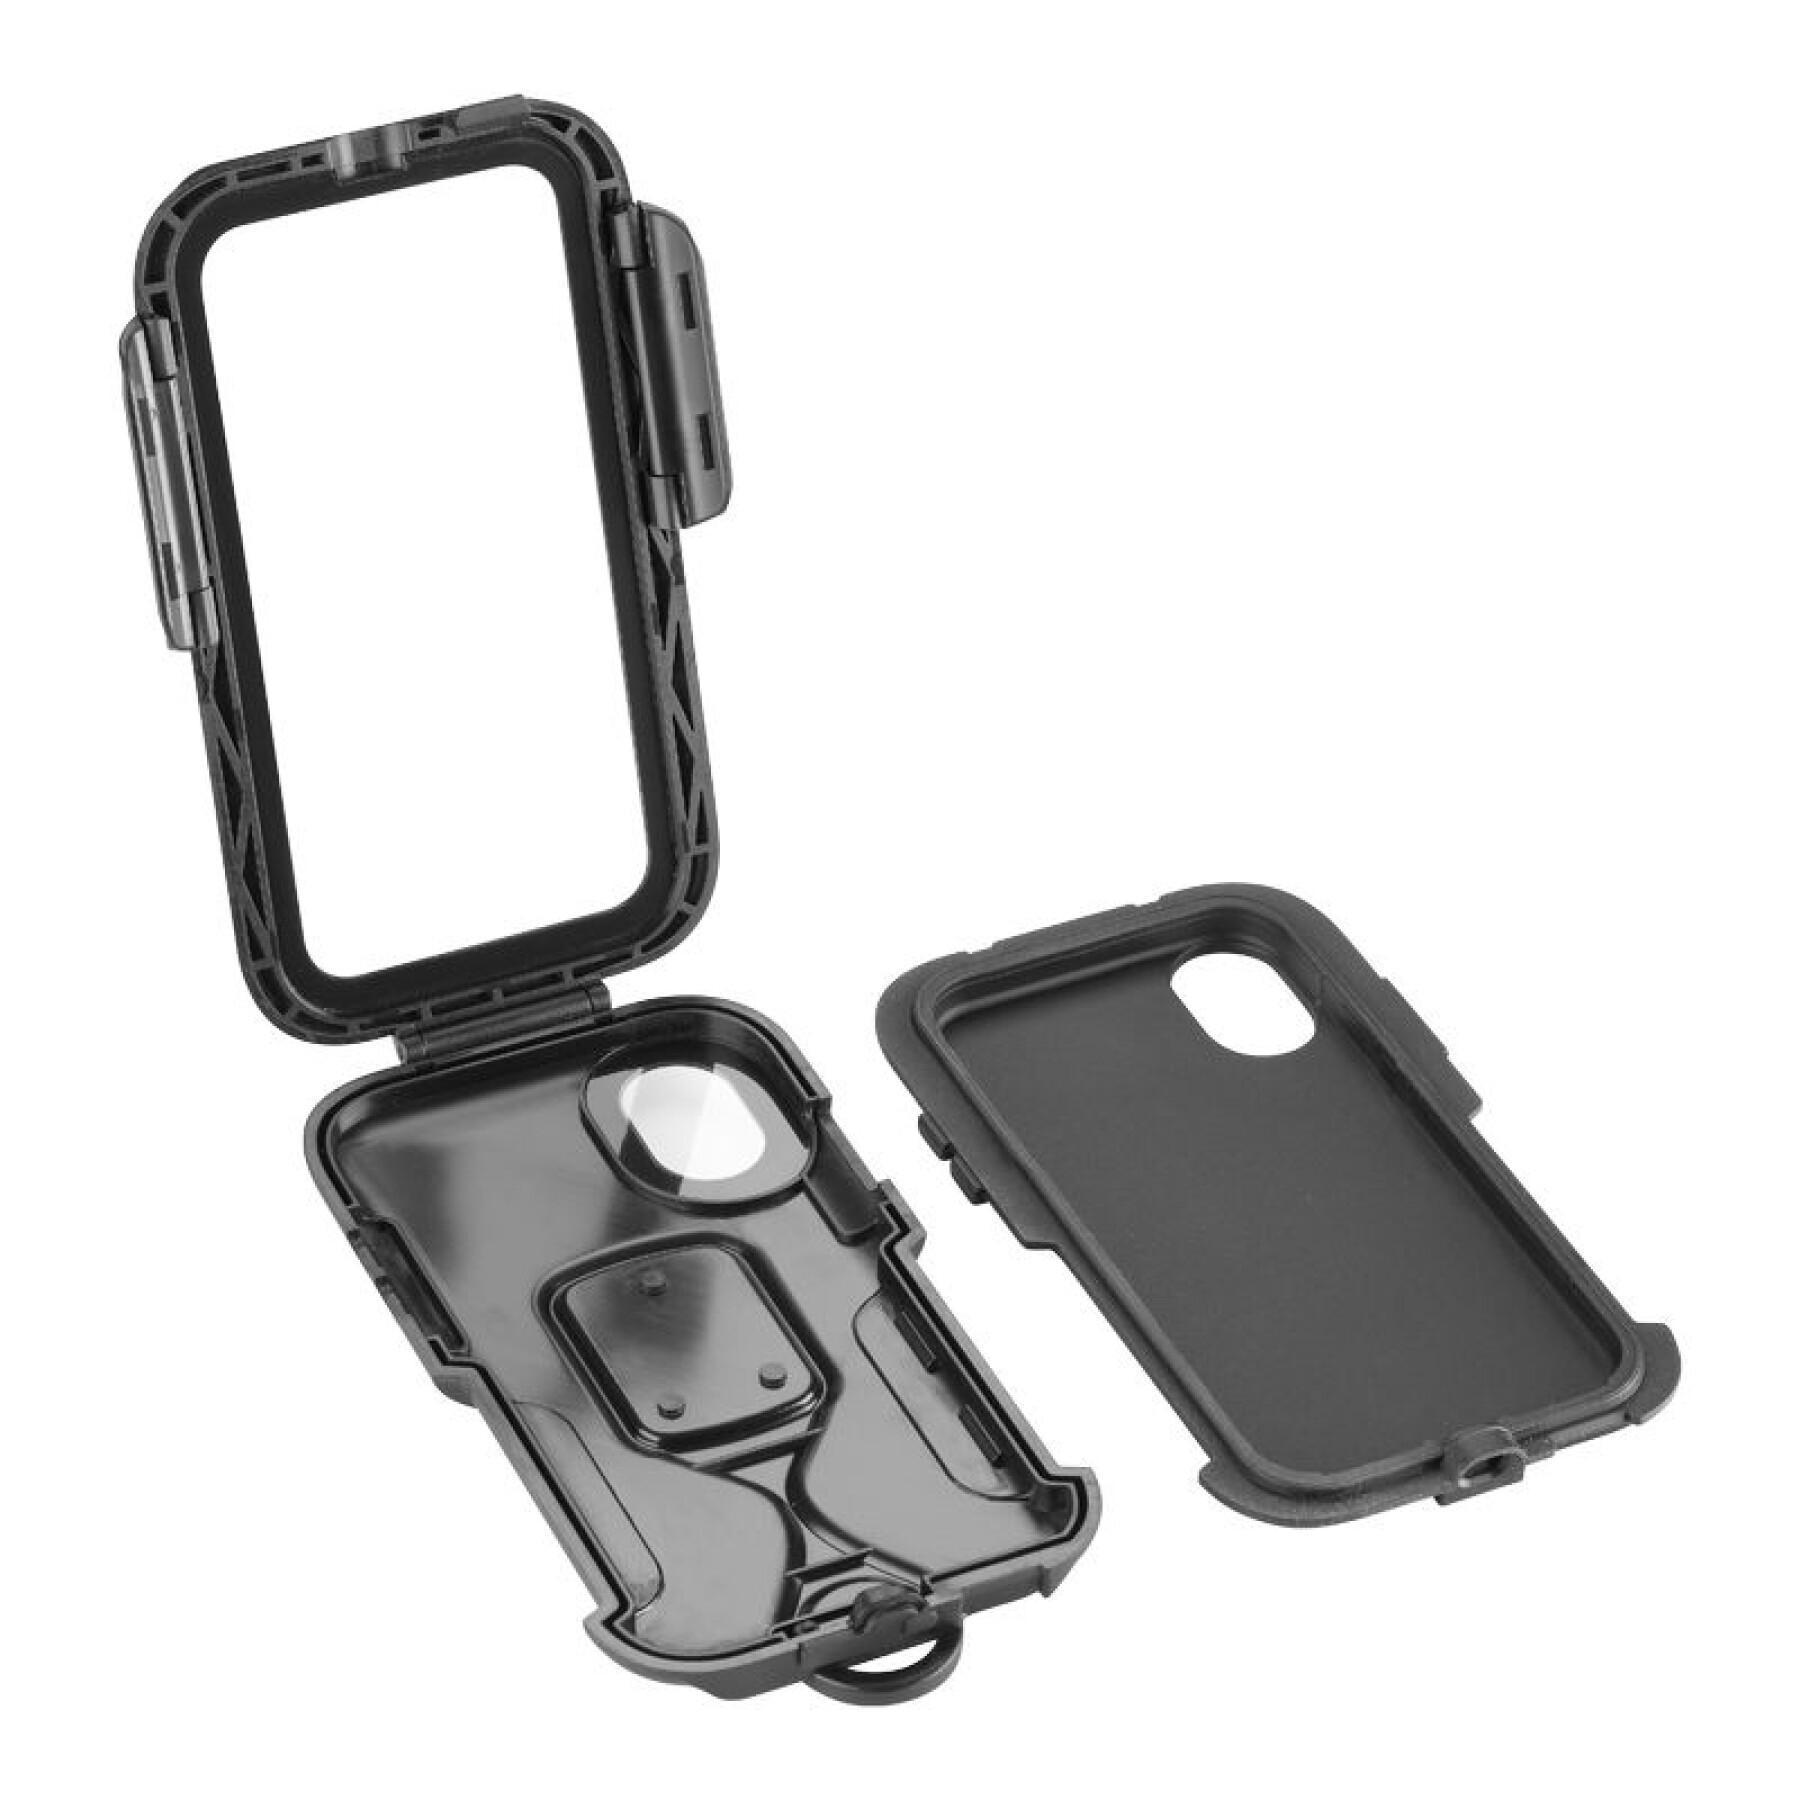 Support smartphone Cellularline iPhone X/XS